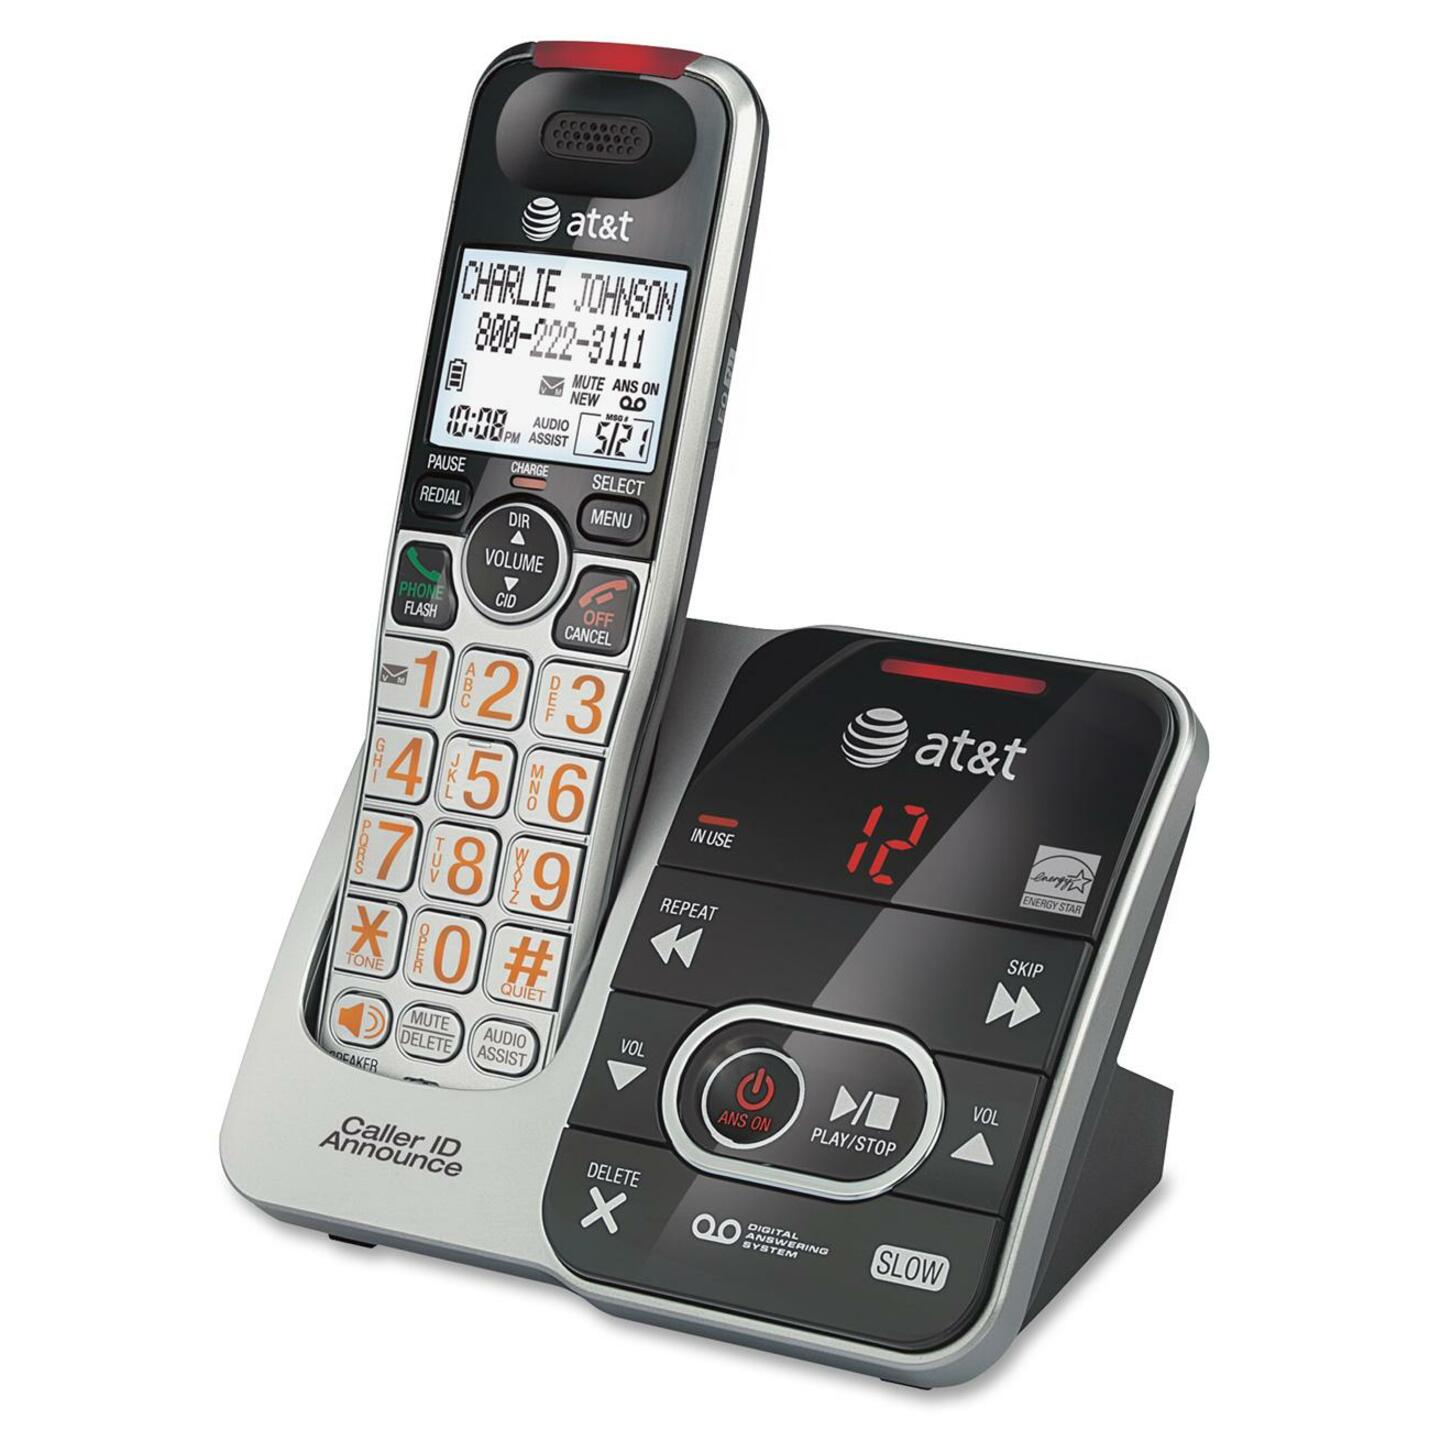 AT&T CRL32102 Cordless Phone with Answering Machine, Silver - DECT 6.0, 1.90 GHz